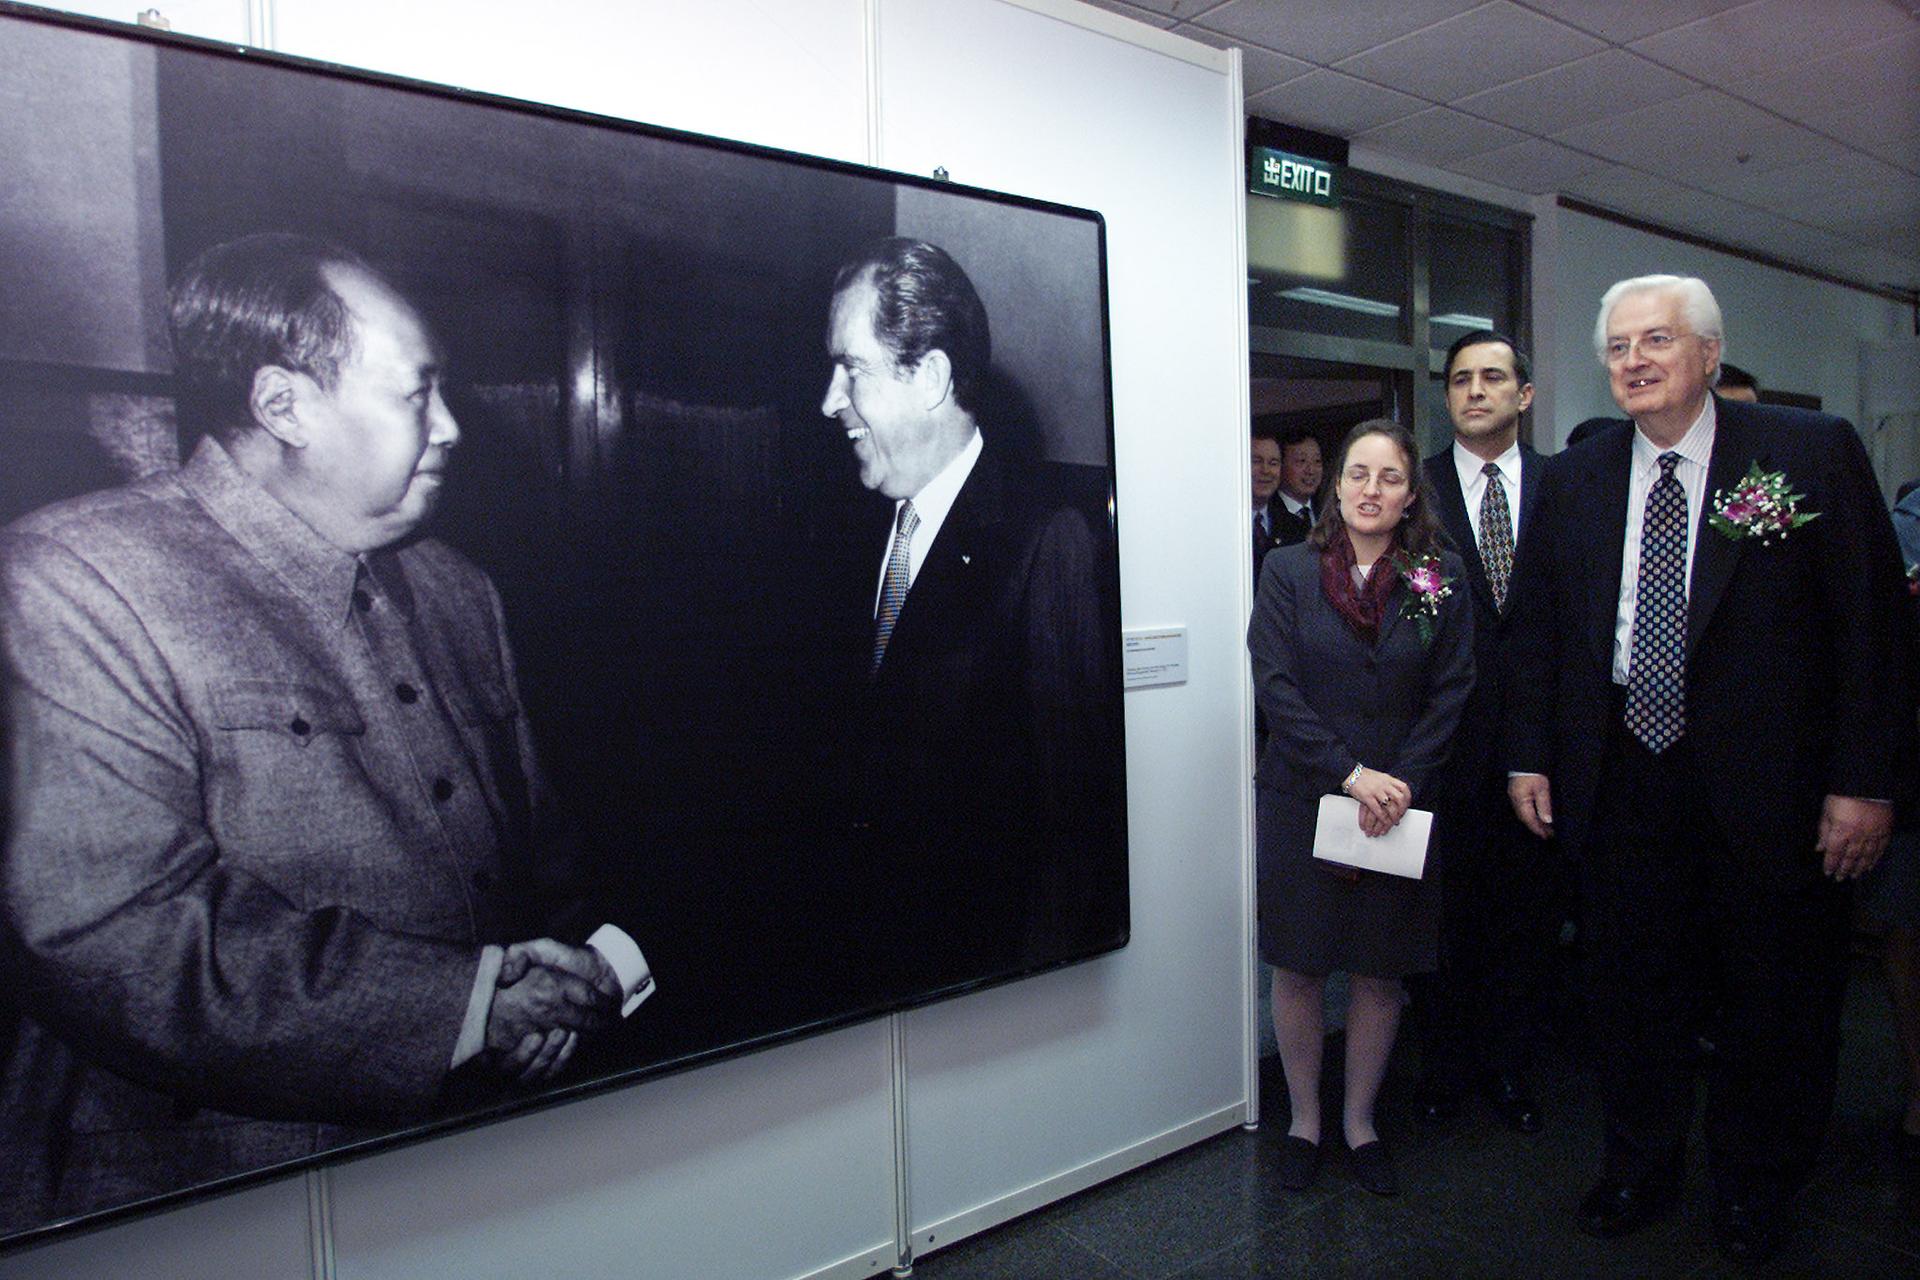 A 2002 exhibition in Shanghai called "Journeys to Peace and Cooperation" showcases the 30th anniversary of U.S. President Richard Nixon's historic visit to China in 1972. 